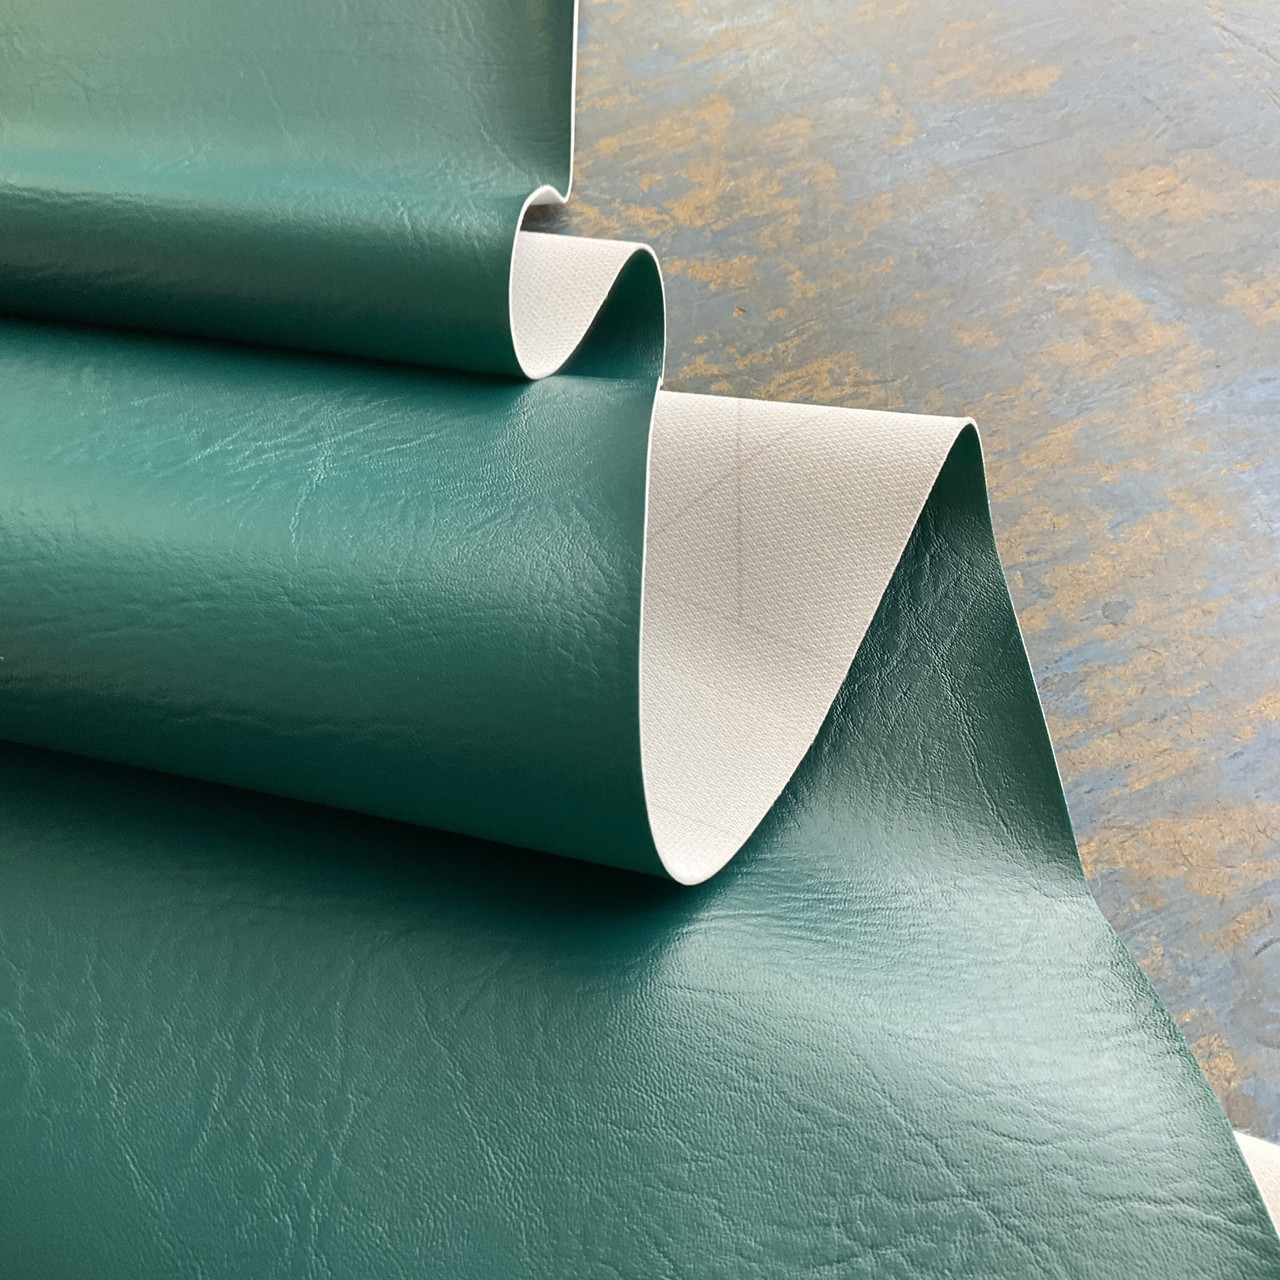 Ottertex 54 Vinyl 100% Polyester Faux Leather Craft Fabric By the Yard,  Forest Green